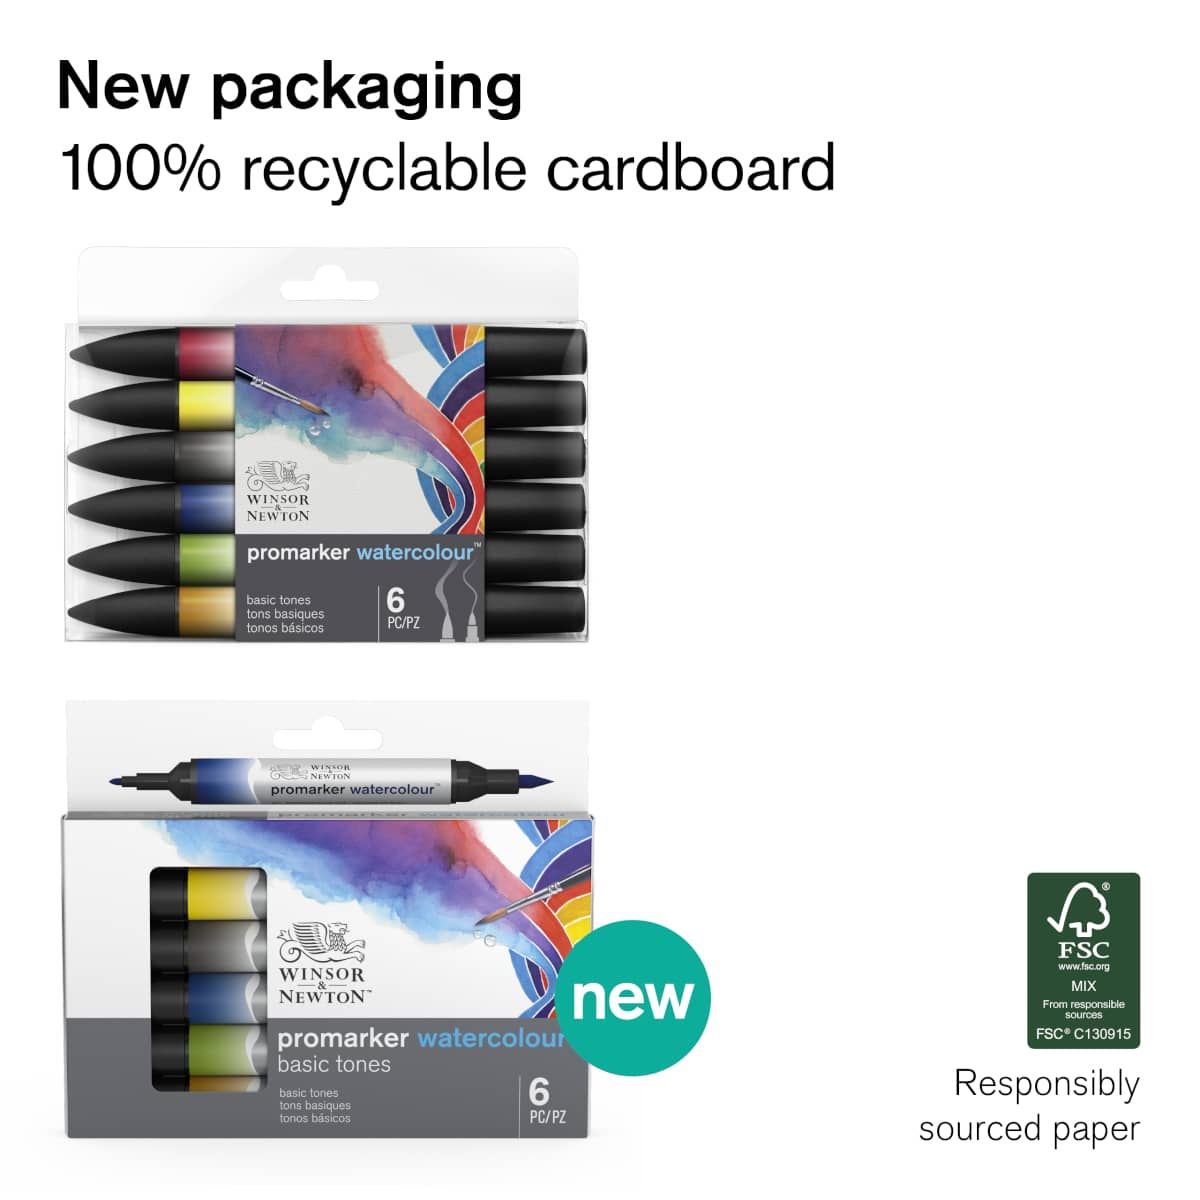 Packaging now made with 100% recyclable cardboard